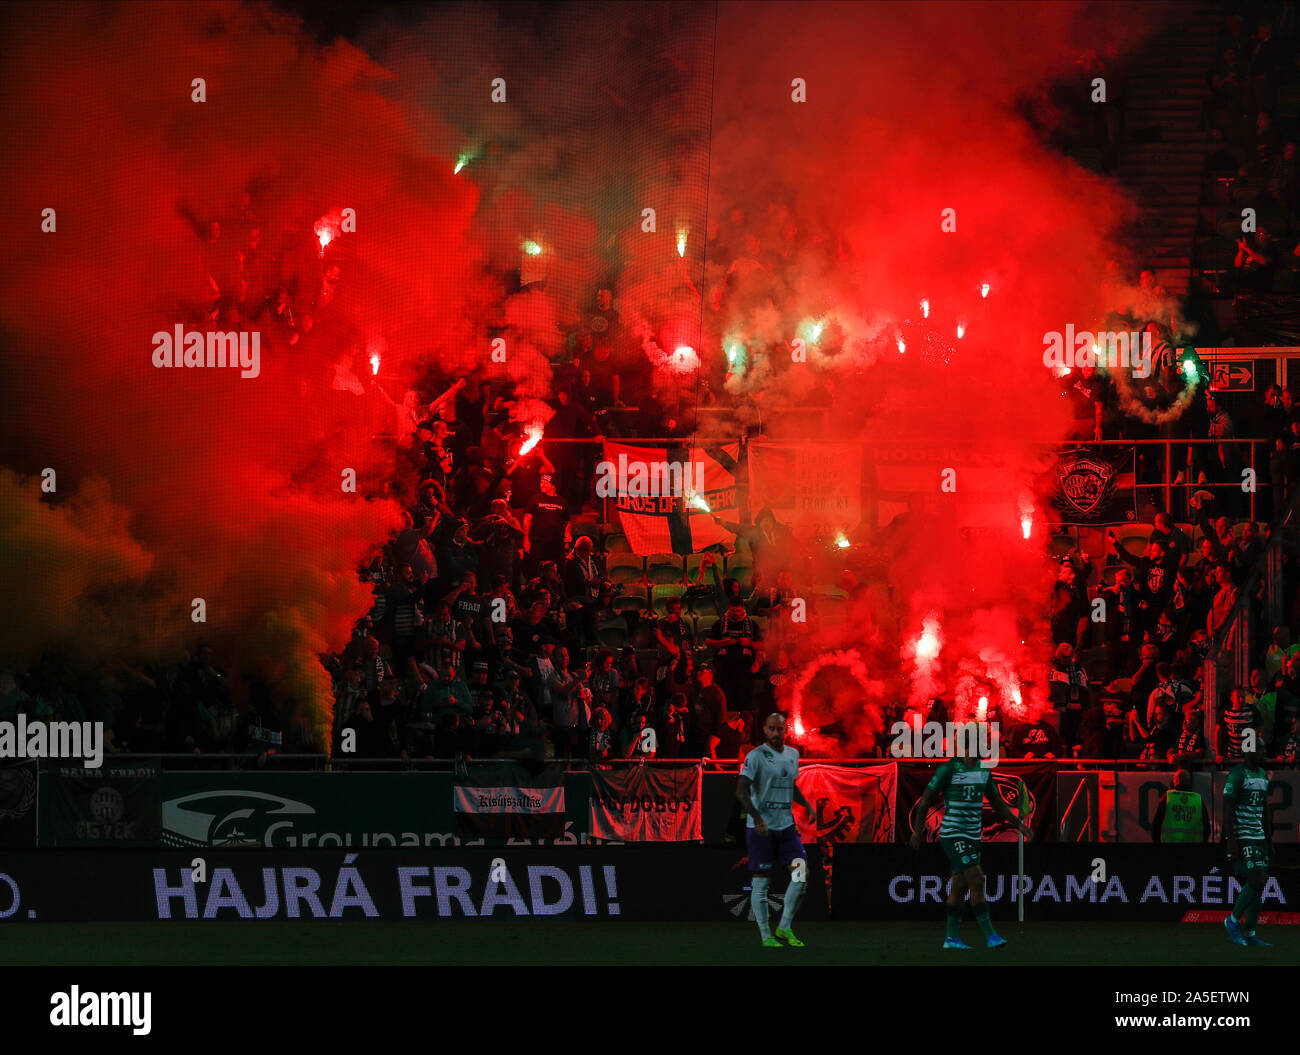 BUDAPEST, HUNGARY - OCTOBER 19: Ultras of Ferencvarosi TC light torches during the Hungarian OTP Bank Liga match between Ferencvarosi TC and Ujpest FC at Groupama Arena on October 19, 2019 in Budapest, Hungary. Stock Photo